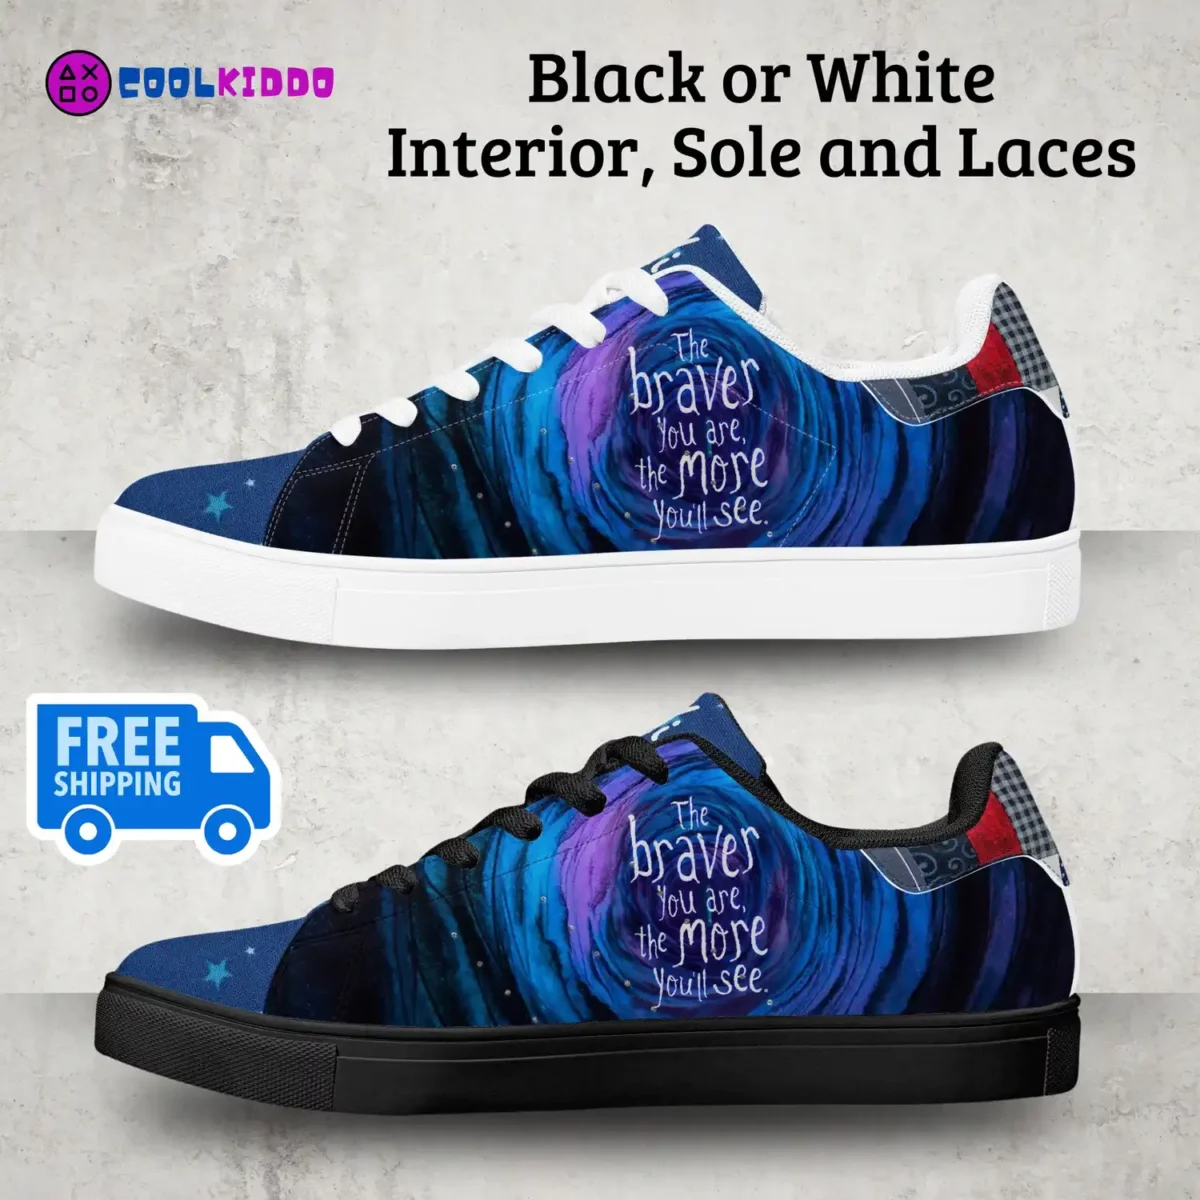 Custom Coraline Movie Inspired Classic Low-Top Leather Sneakers – White/Black – Unisex Casual Shoes Cool Kiddo 14